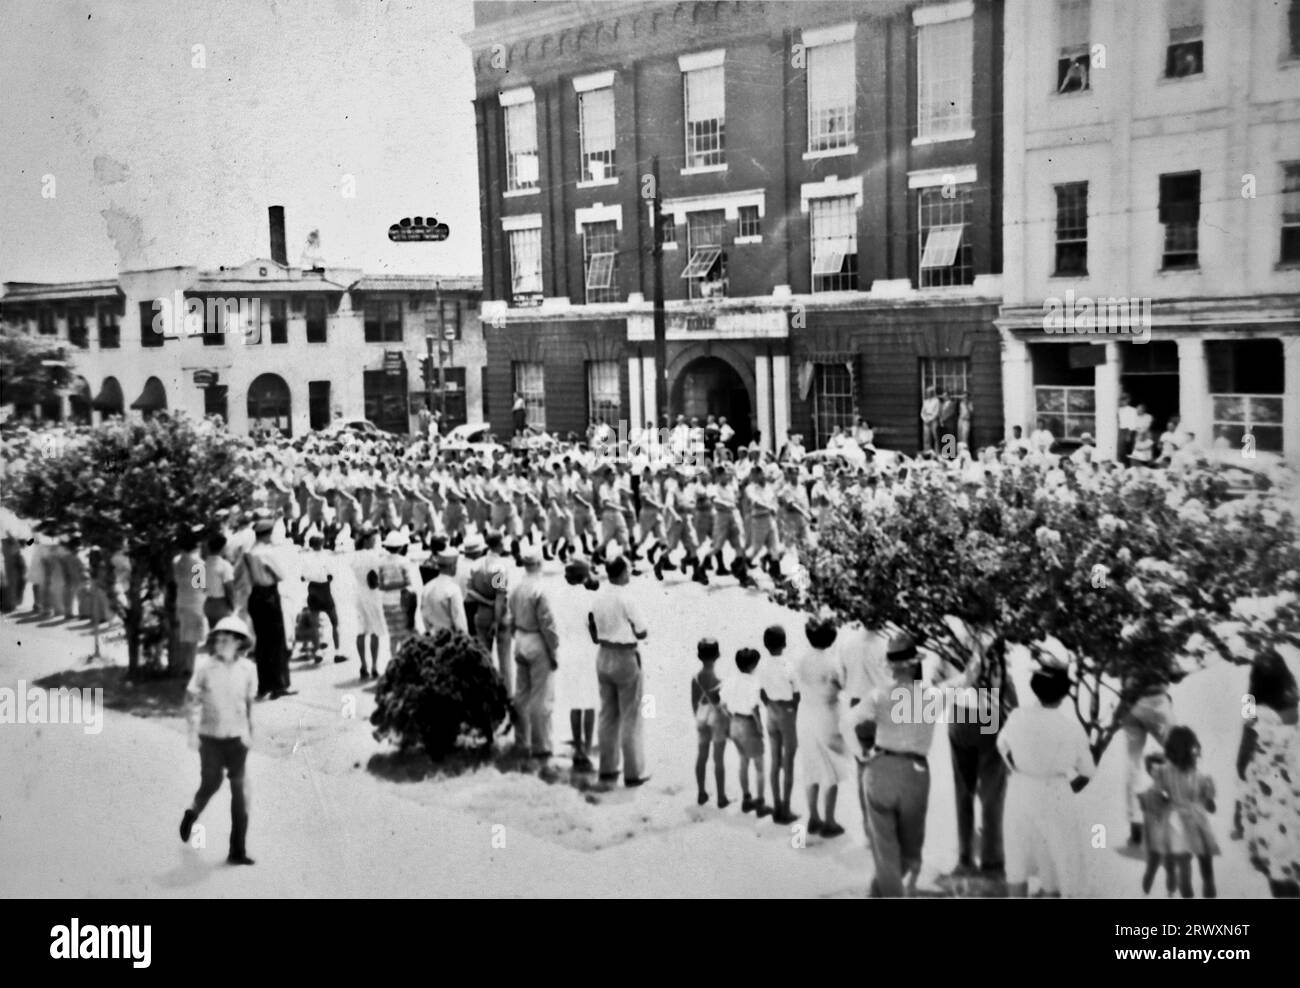 Parade at Riverside, California:  Marching in the street. Rare photograph: From a collection compiled by an unknown British serviceman covering the No. 1 Composite Demonstration, AA Battery, tour of the USA, from July 11th 1943. This is one from over one hundred images in the collection which were on average around 4x3 inches. Stock Photo